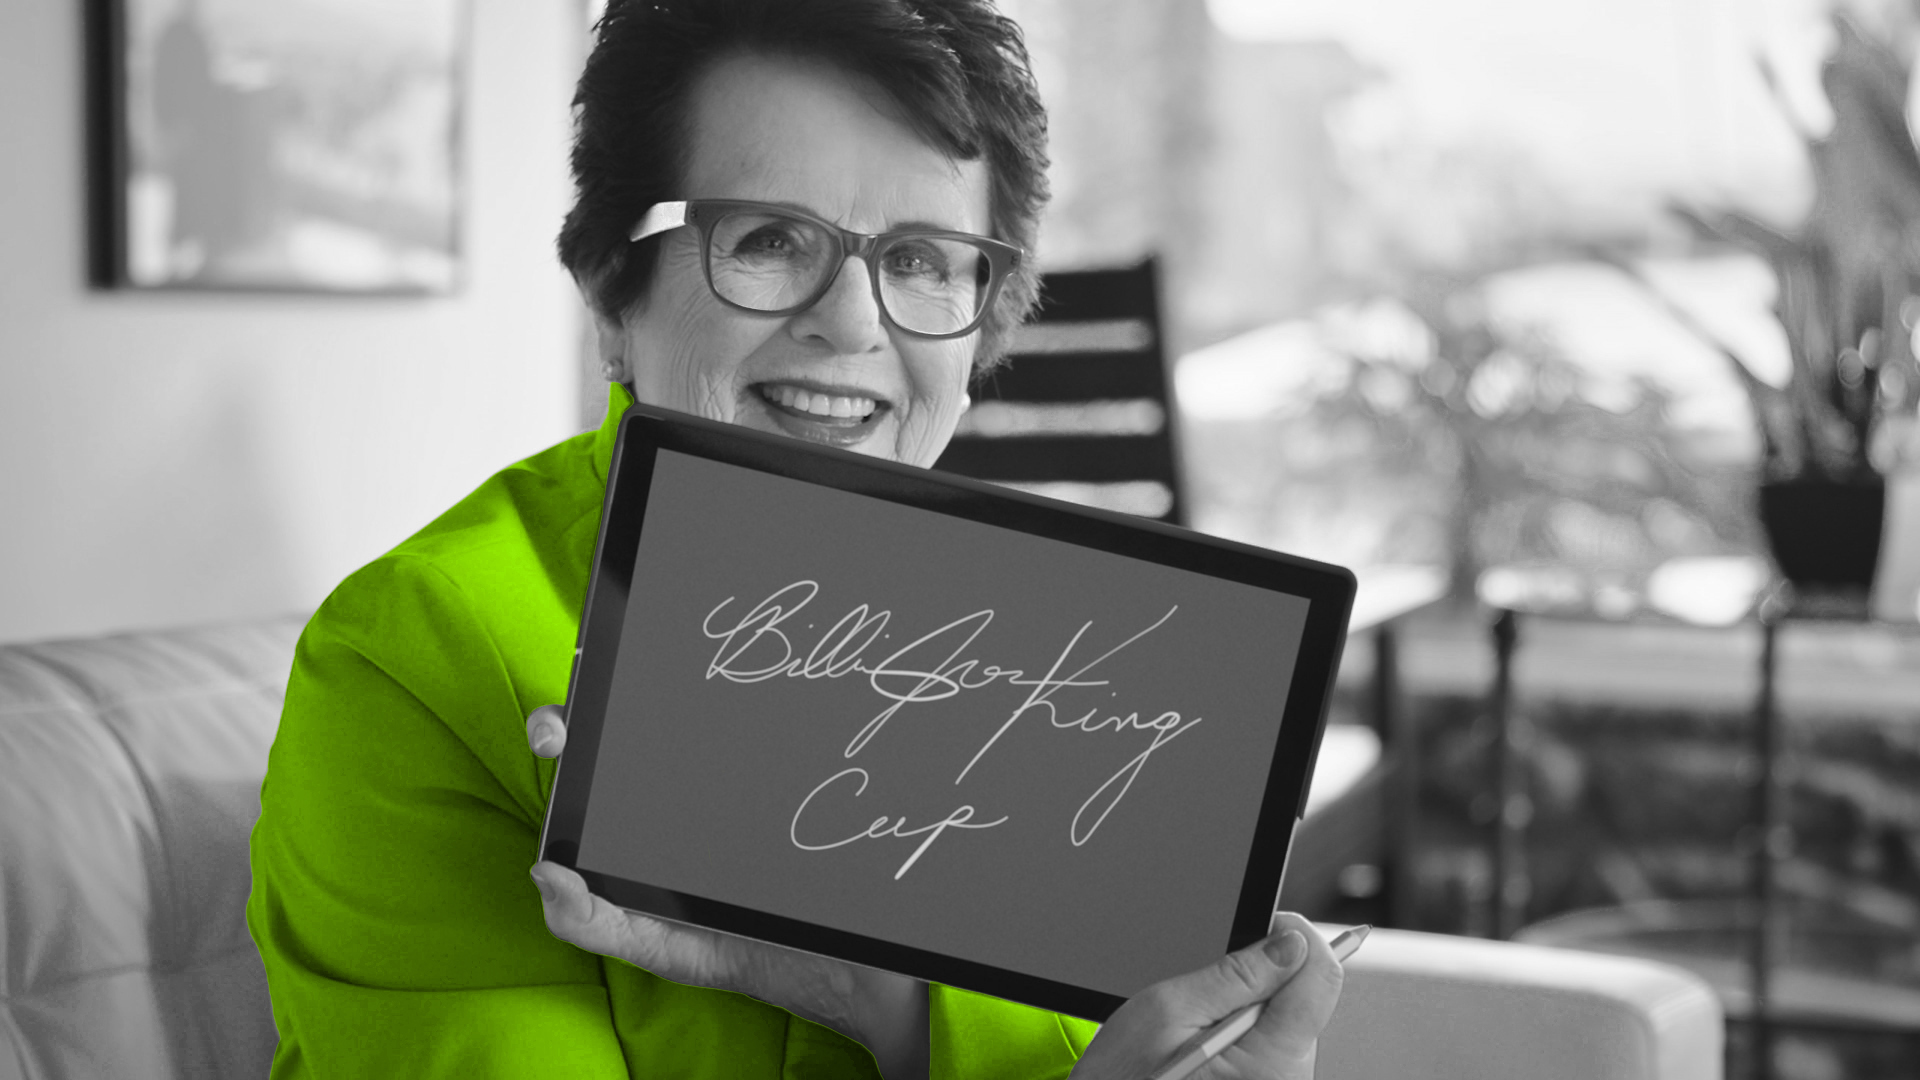 Billie Jean King is a legend in women’s tennis and a game-changing pioneer in women’s sports more broadly. She has a mantra that’s guided her career spanning decades: “progress never ends.” While she may no longer be playing on center court, she continues to champion the next generation of women in sports, tirelessly advocating for “equal pay for equal play” and continuing to develop tools and resources that empower women in sports to be their best.